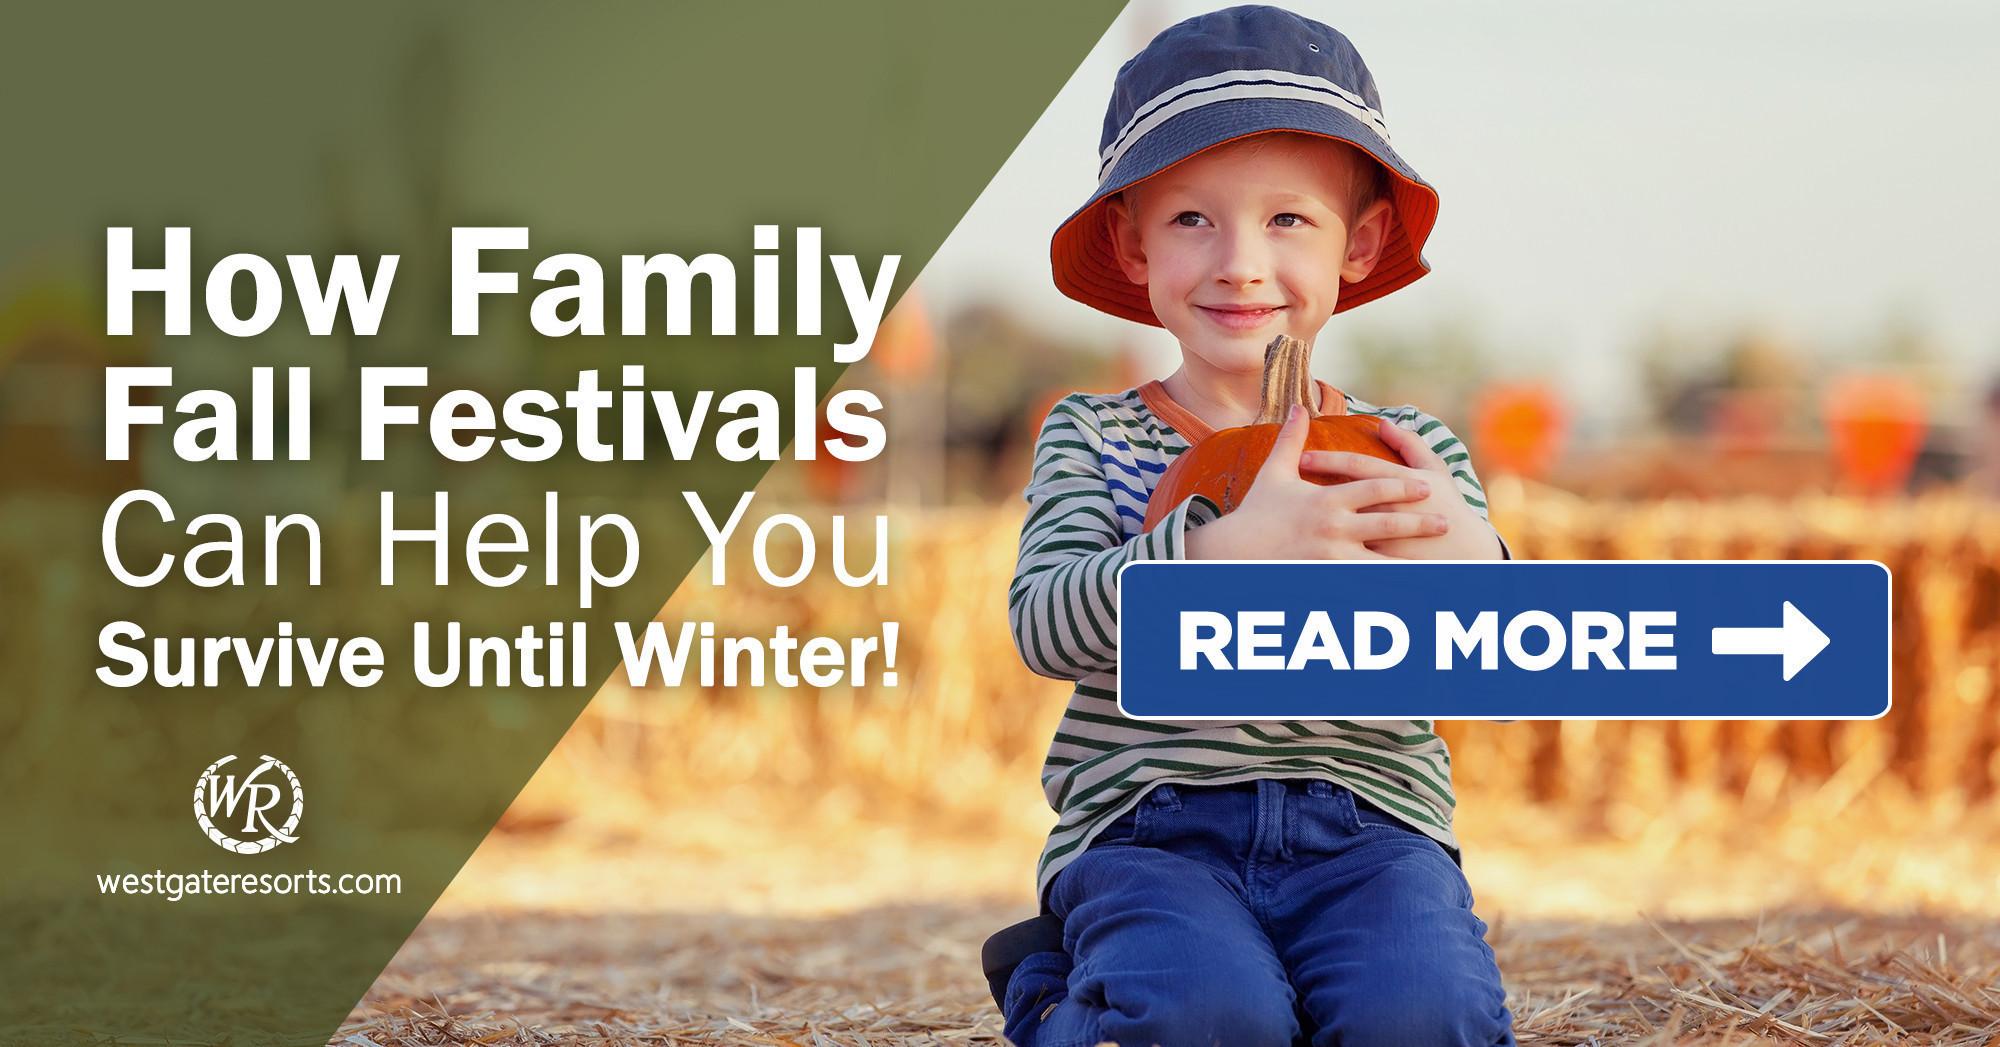 How Family Fall Festivals In NYC Can Help You Survive Until Winter! | Fall Festivals in New York City | Westgate NYC